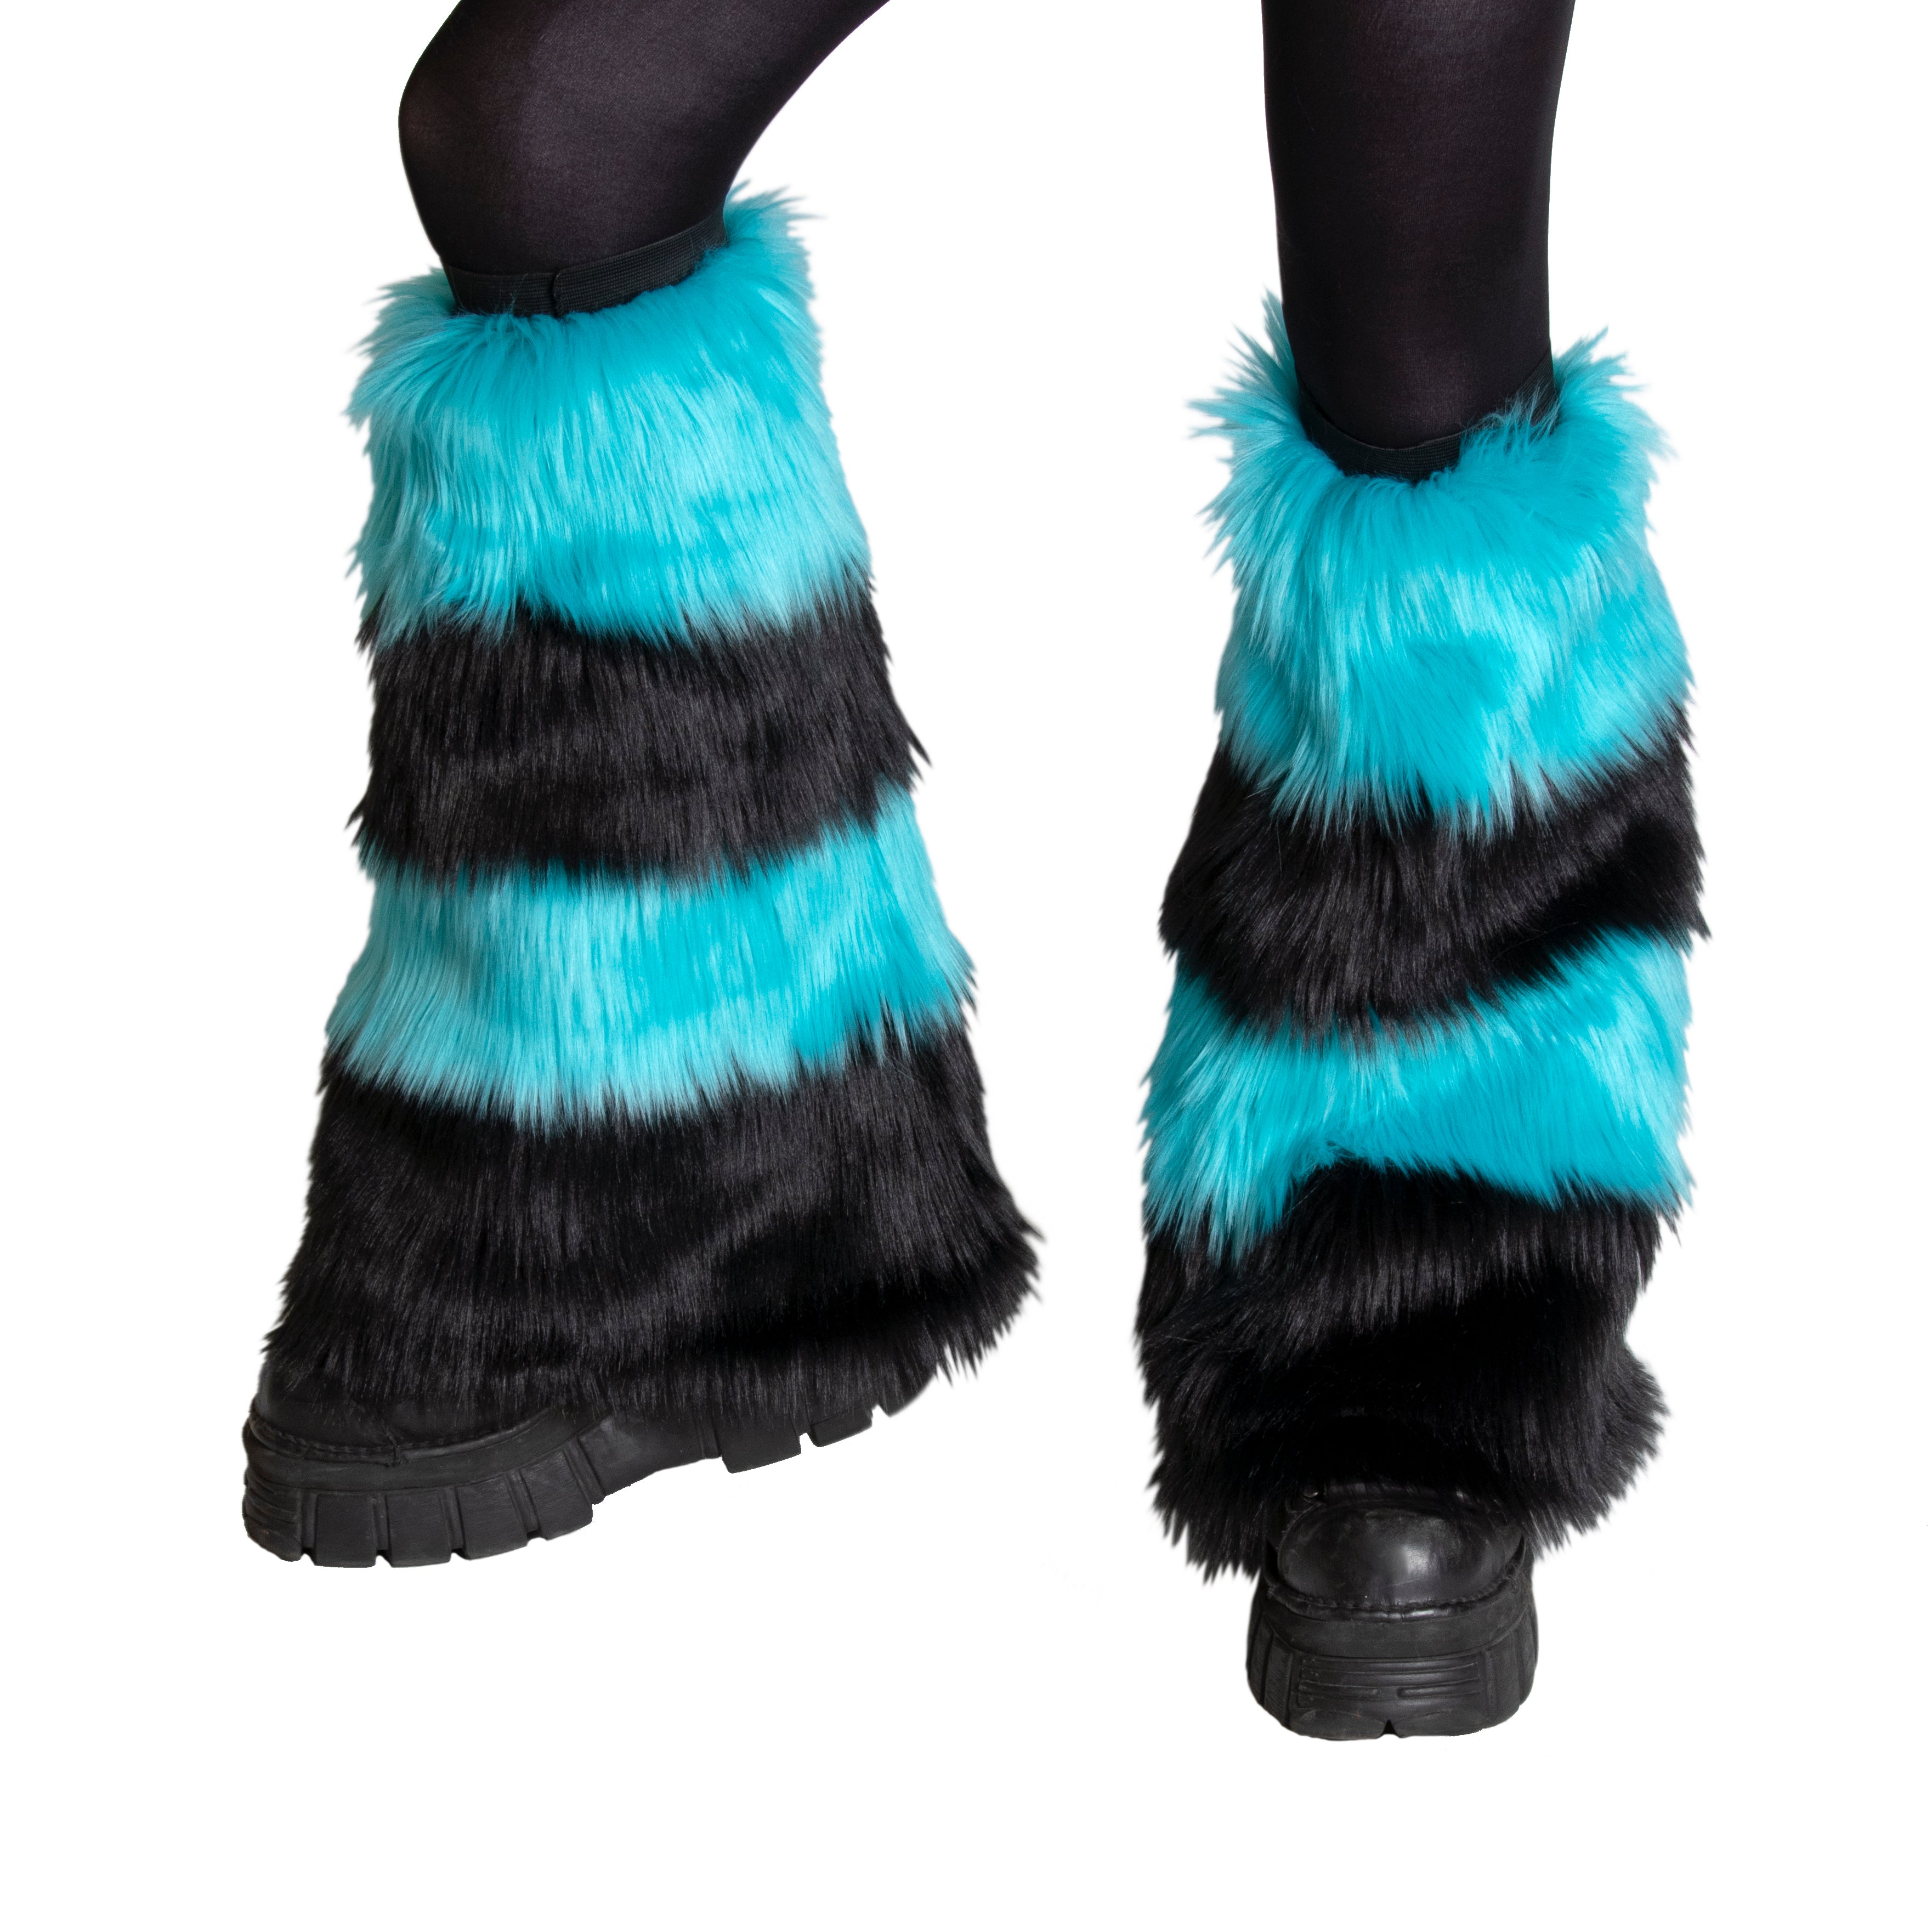 turquoise Pawstar fluffy stripey dance rave leg warmer. Great for halloween costume and furry cosplay.